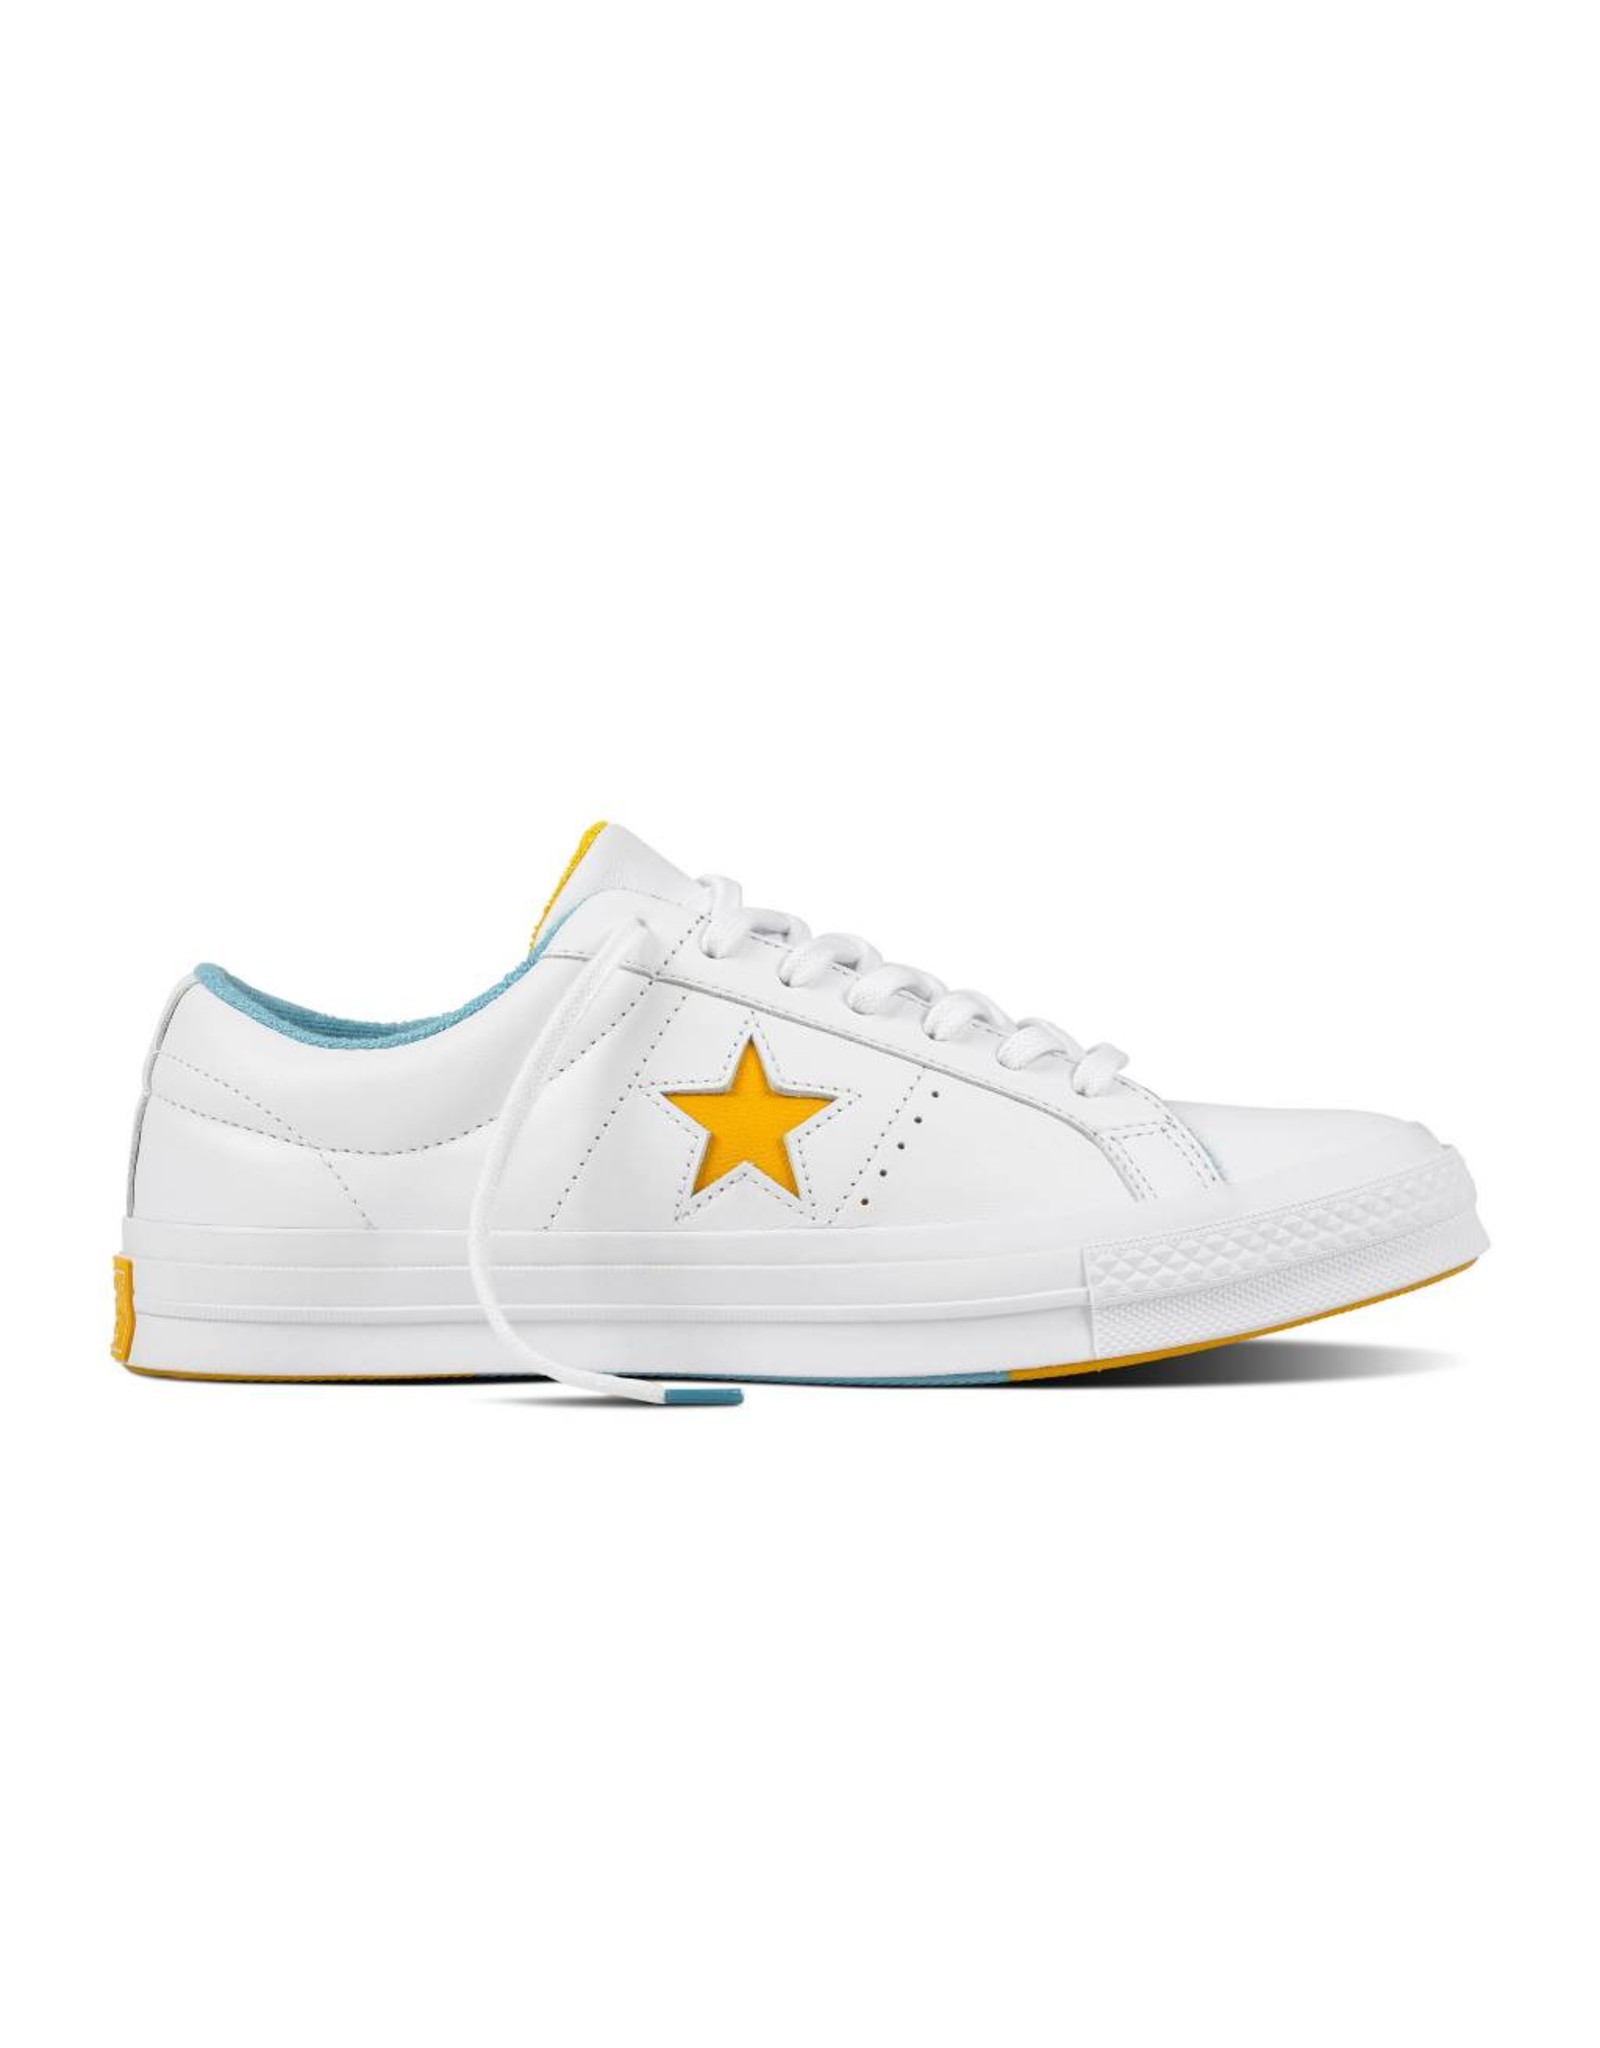 CONVERSE ONE STAR OX CUIR WHITE/MINERAL YELLOW C887MY-160593C